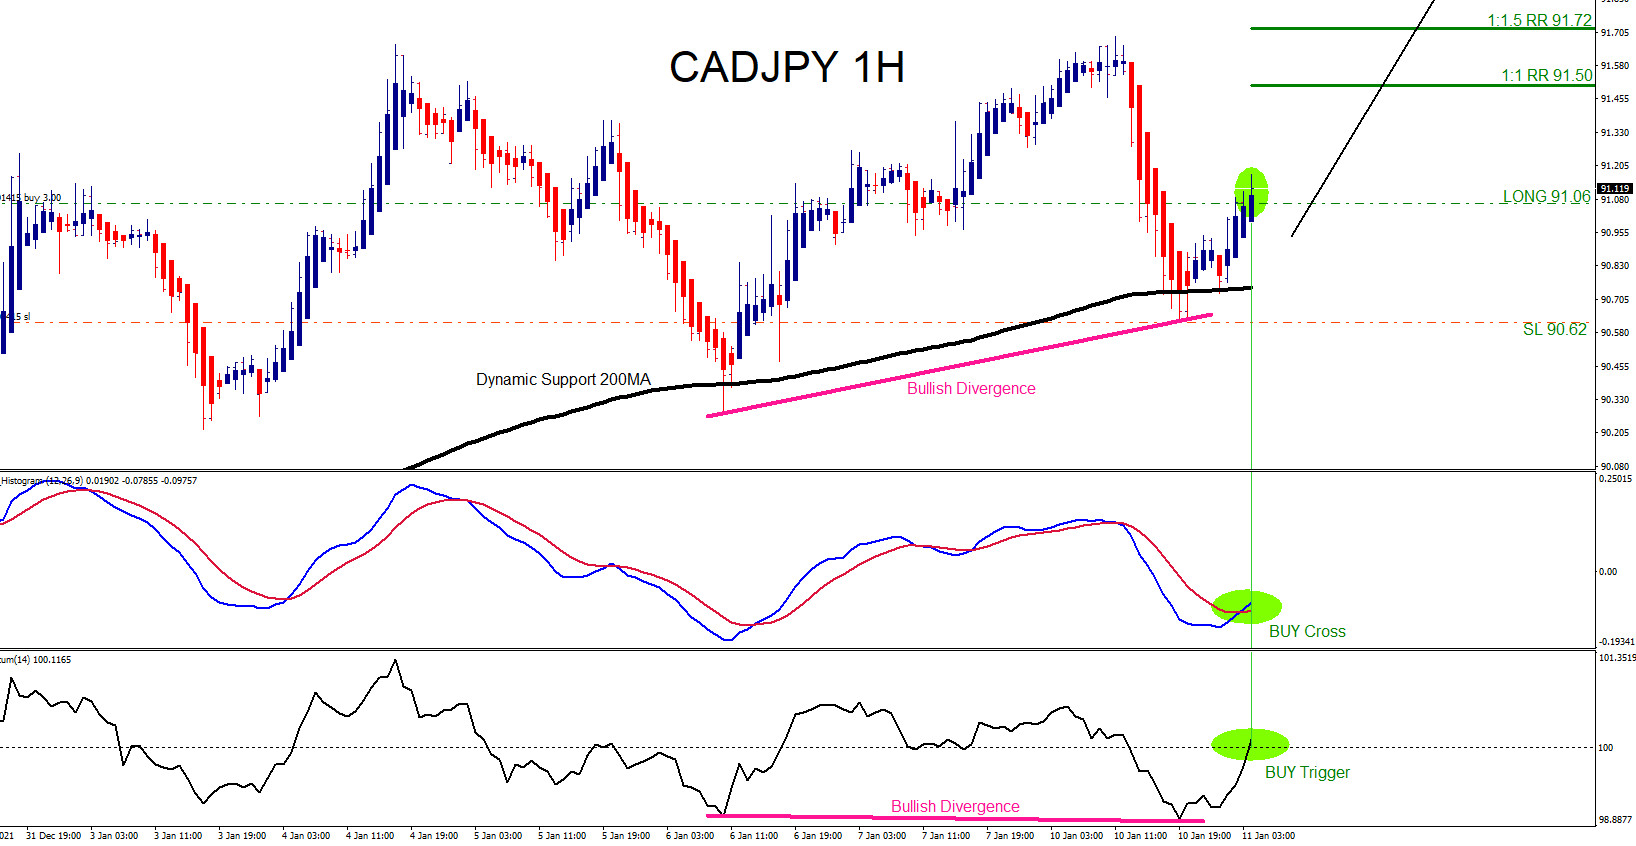 CADJPY : Trading the Move Higher